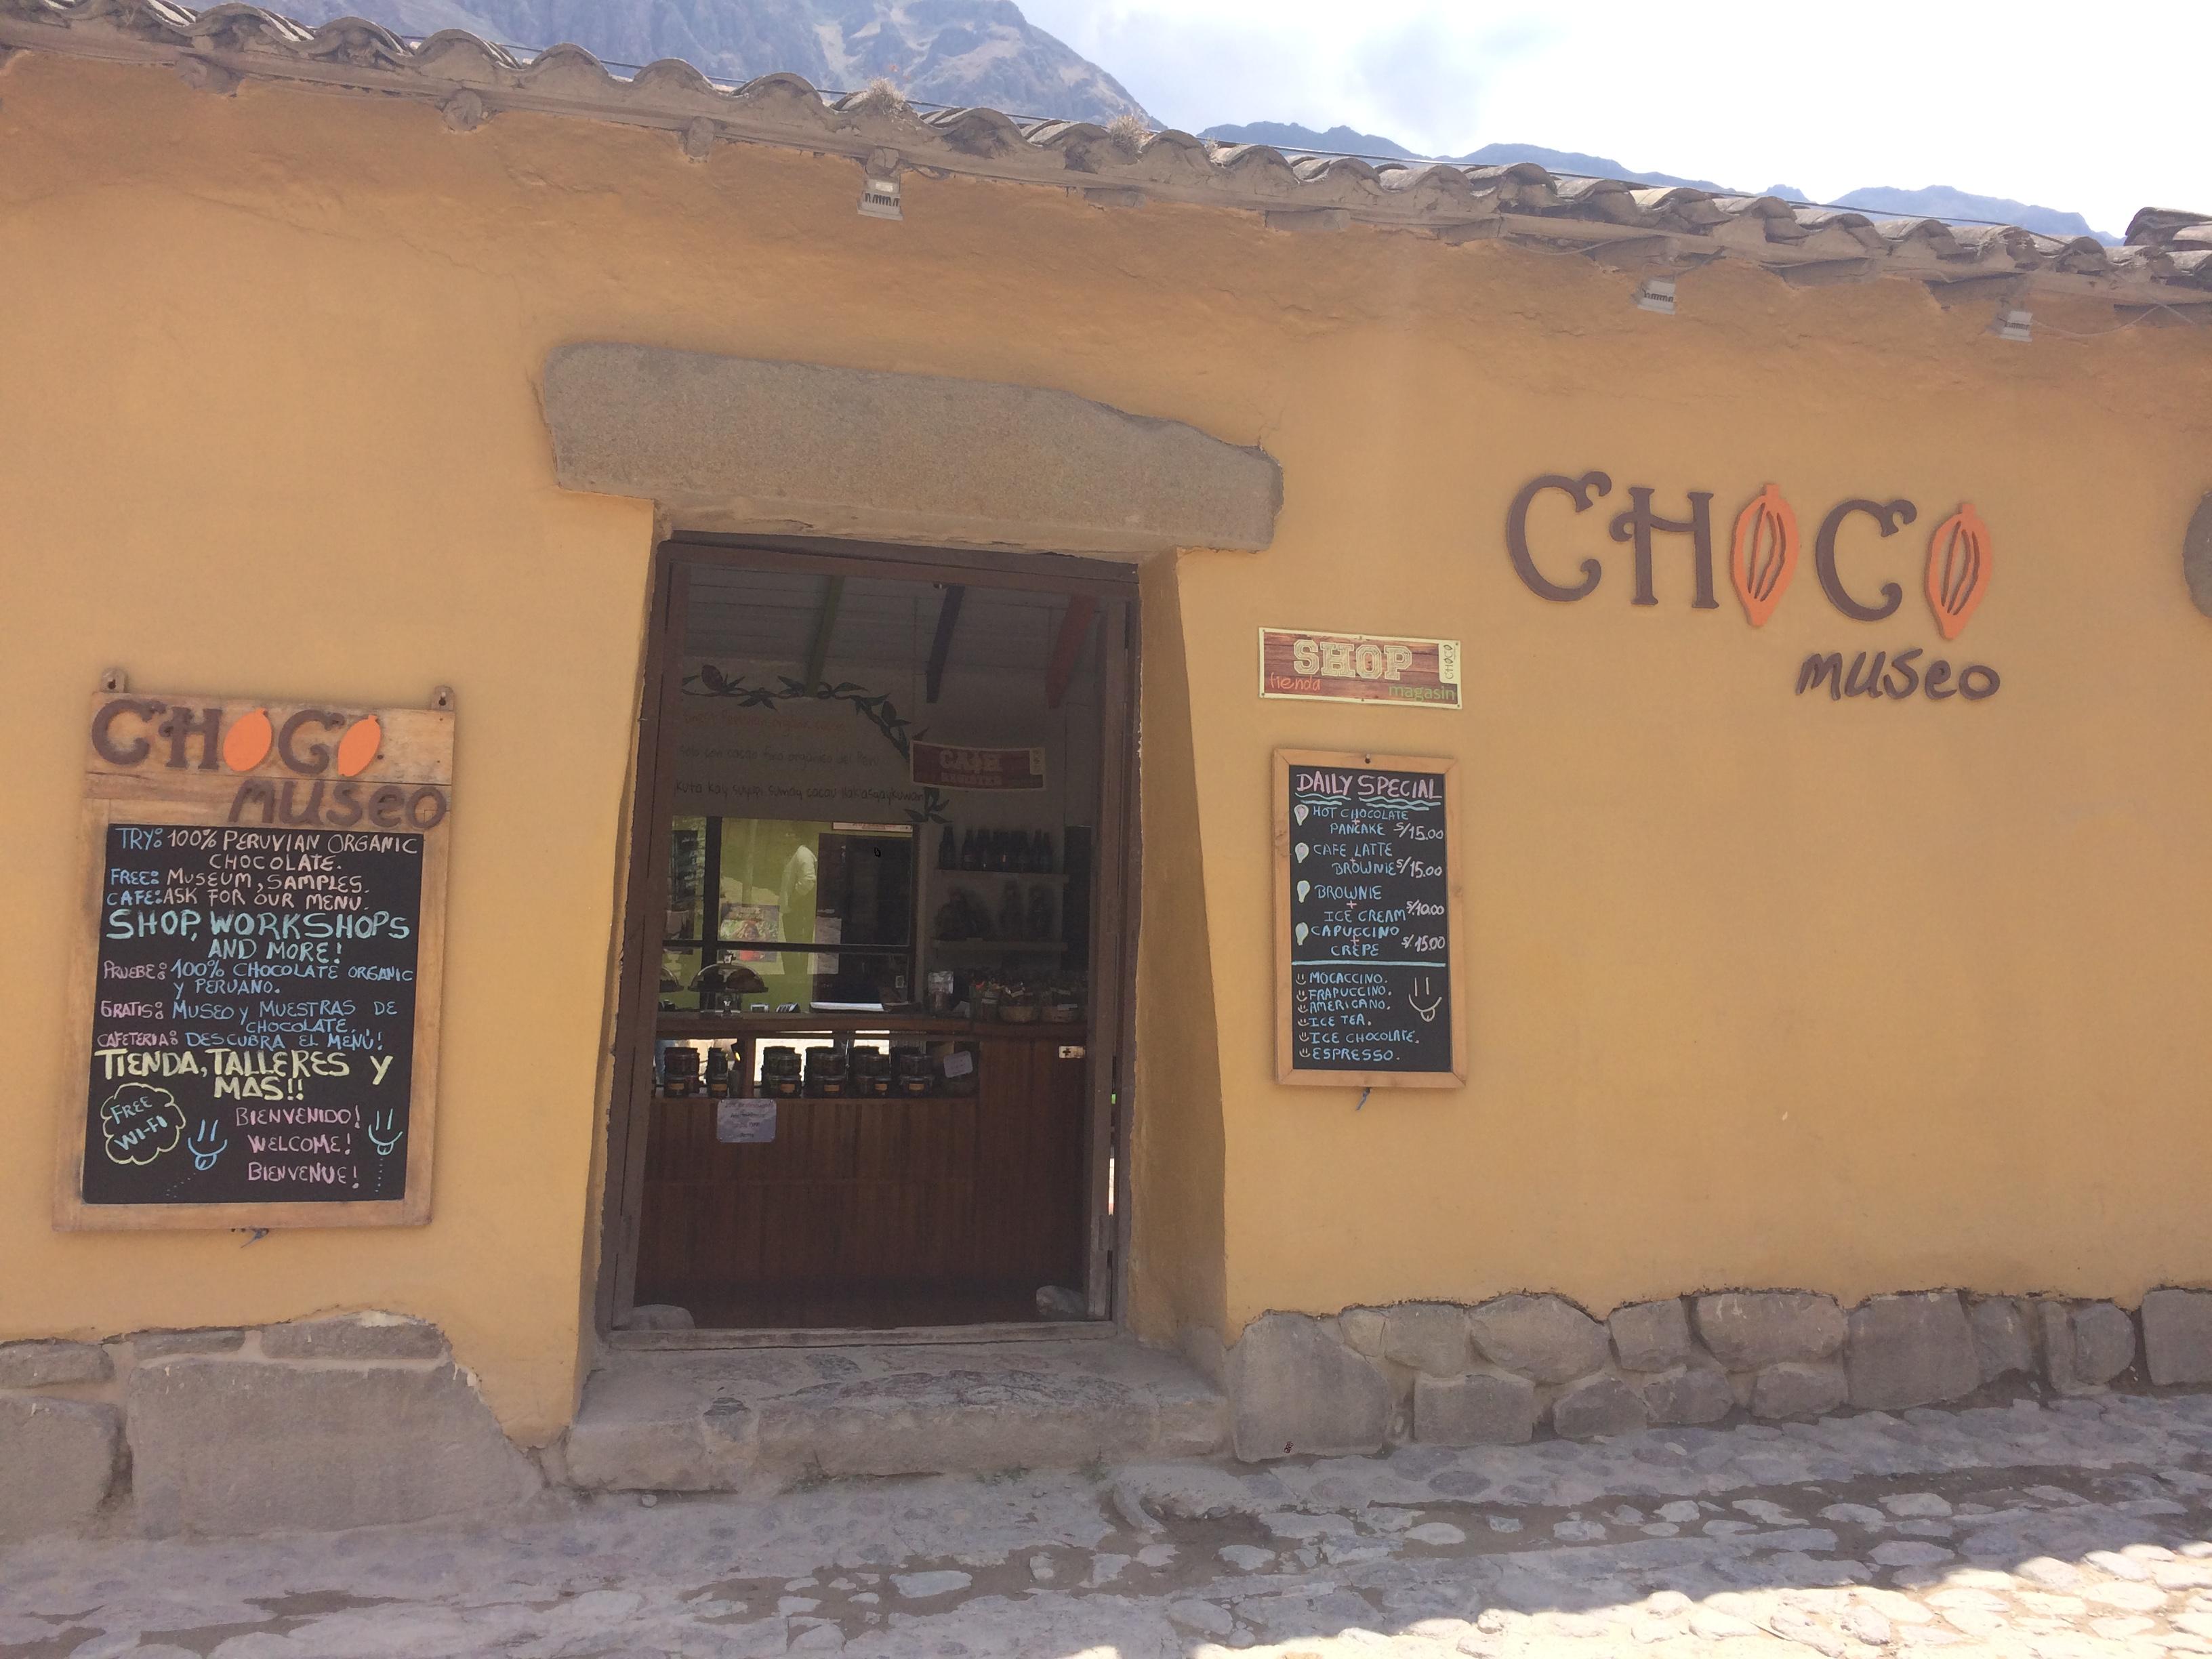 The chocolate museum in Ollantaytambo, Peru. | | | The most comprehensive guide out there to Ollantaytambo, Peru, a small town on the way to Machu Picchu that I had the pleasure to live in for a few months! | #Ollantaytambo #machu Picchu #sacred #valley #valle #sagrado #Travel #Cusco #cuzco #guide #itinerary #What #to #do #eat #chocolate #museum